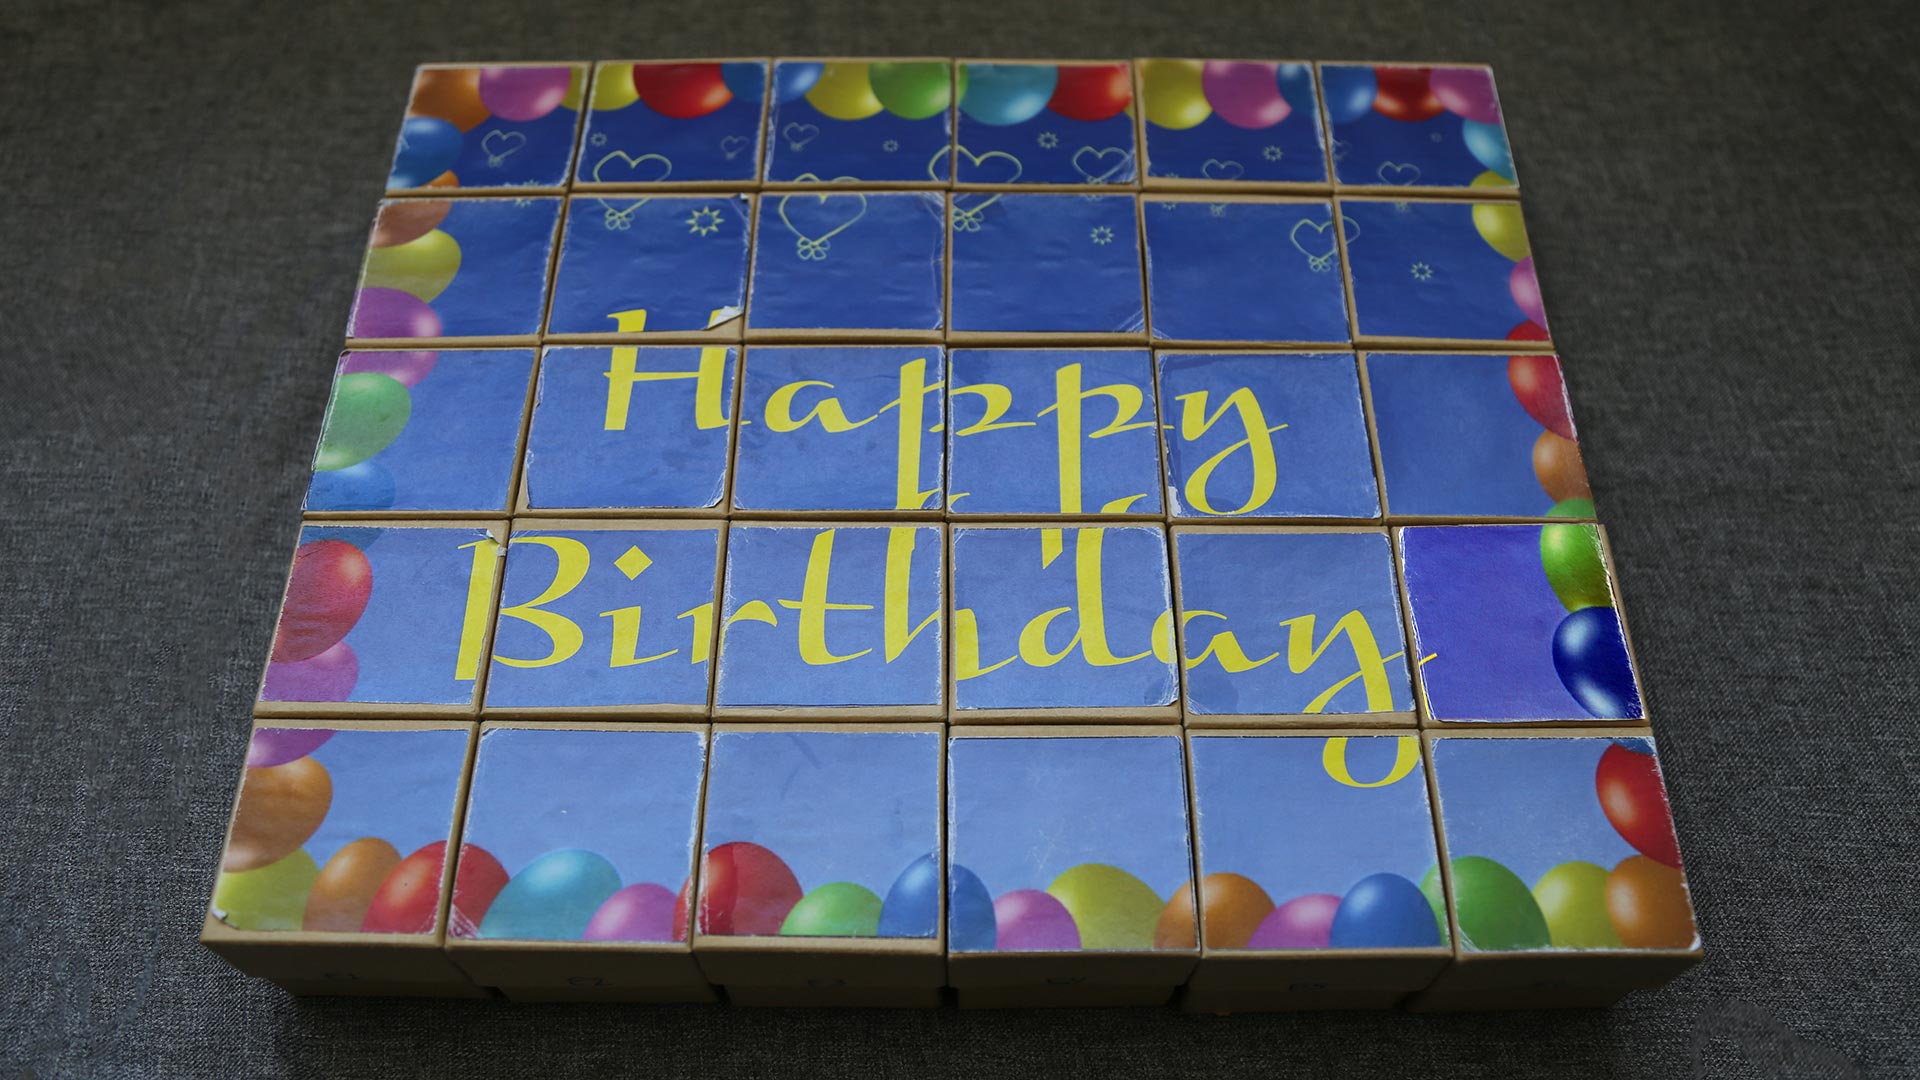 A grid of small boxes with a happy birthday message with balloons printed on the top of the boxes